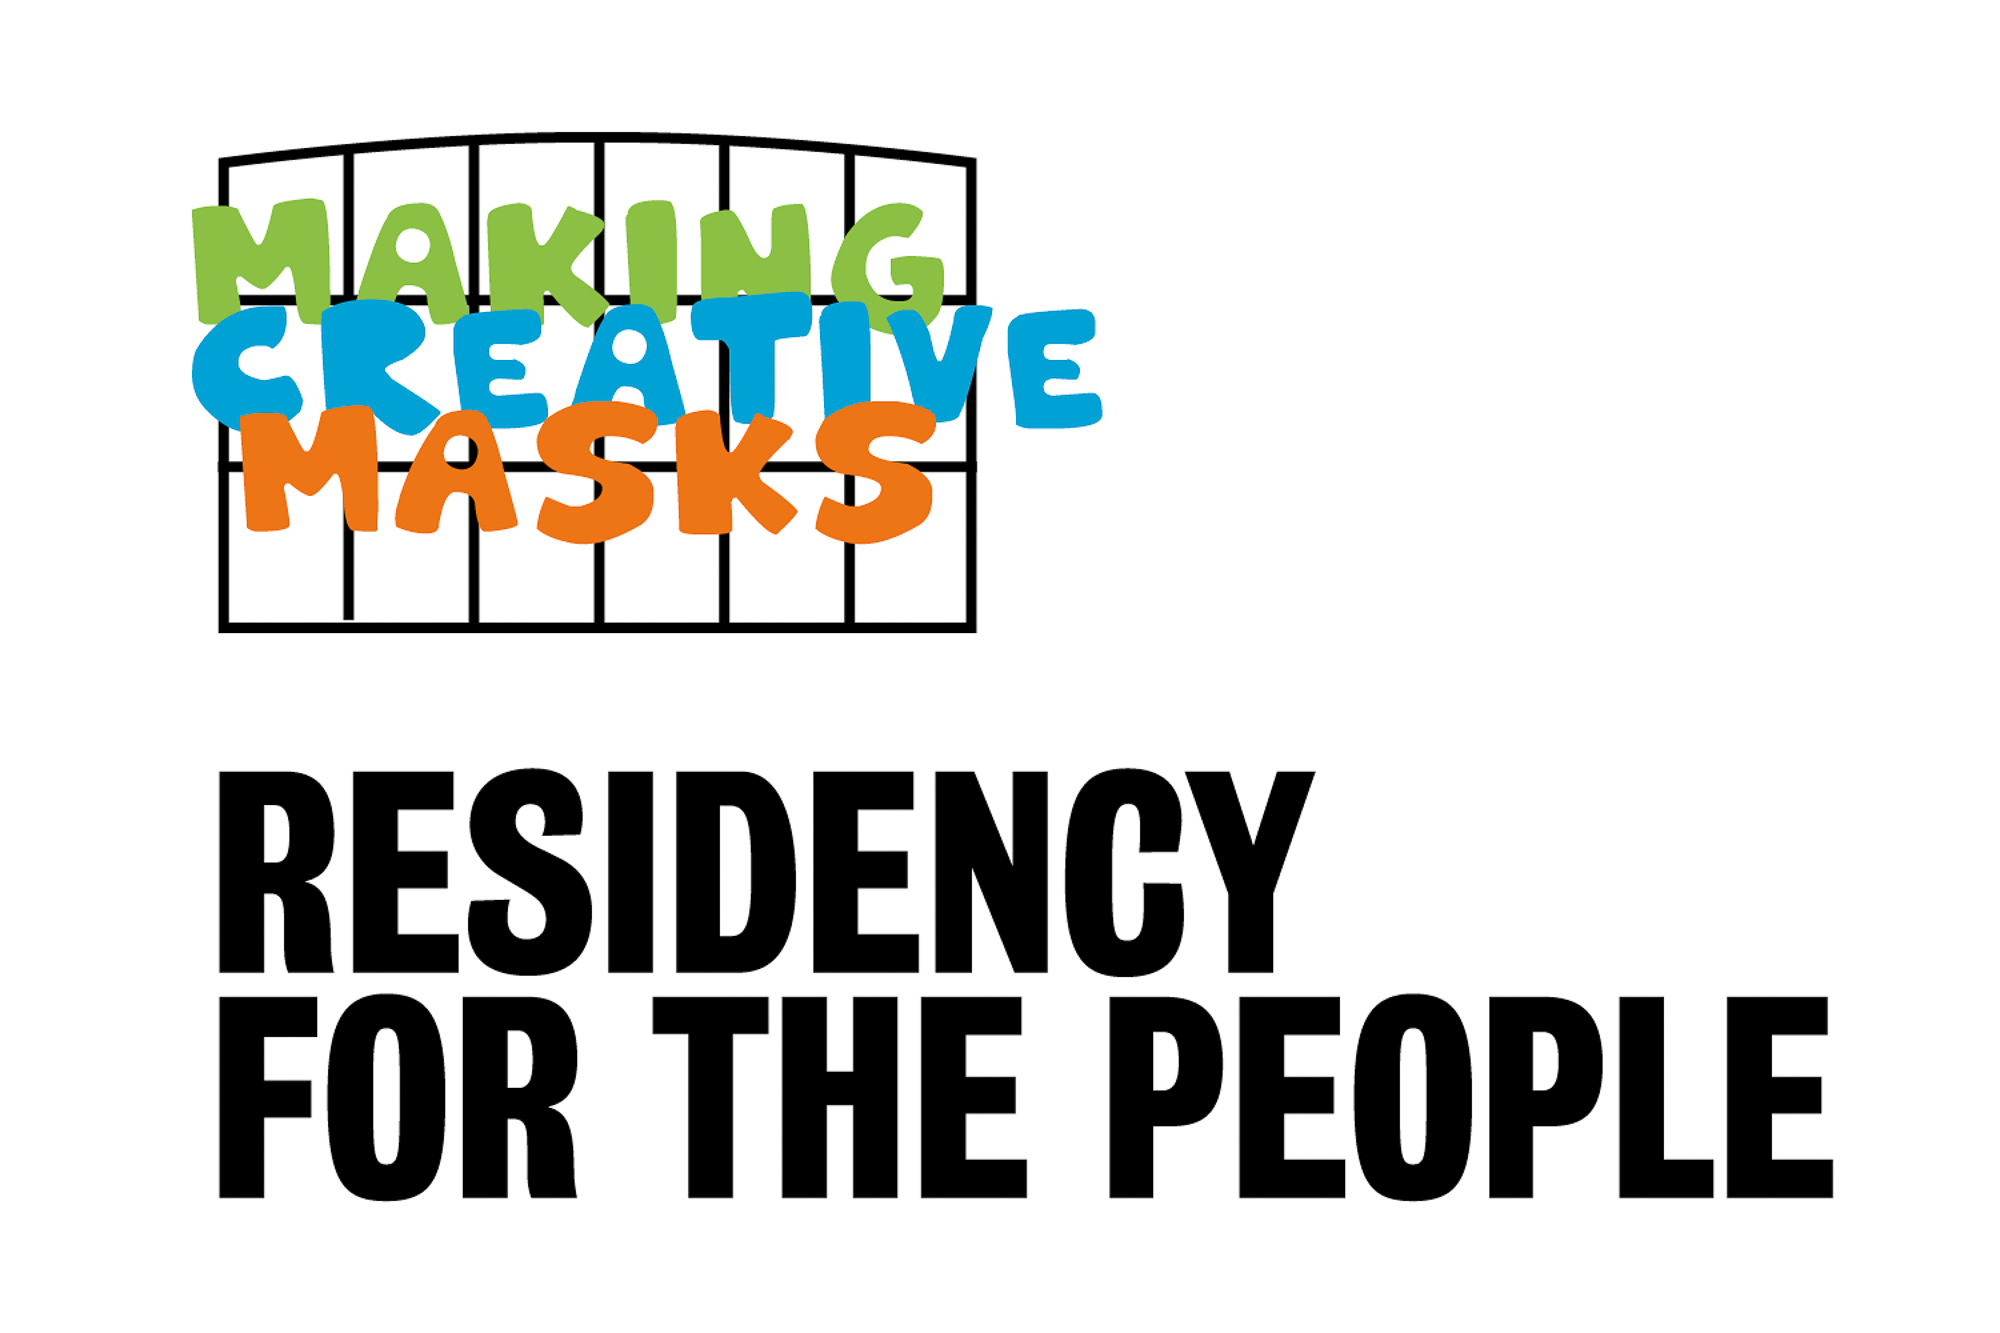 Residency for the People